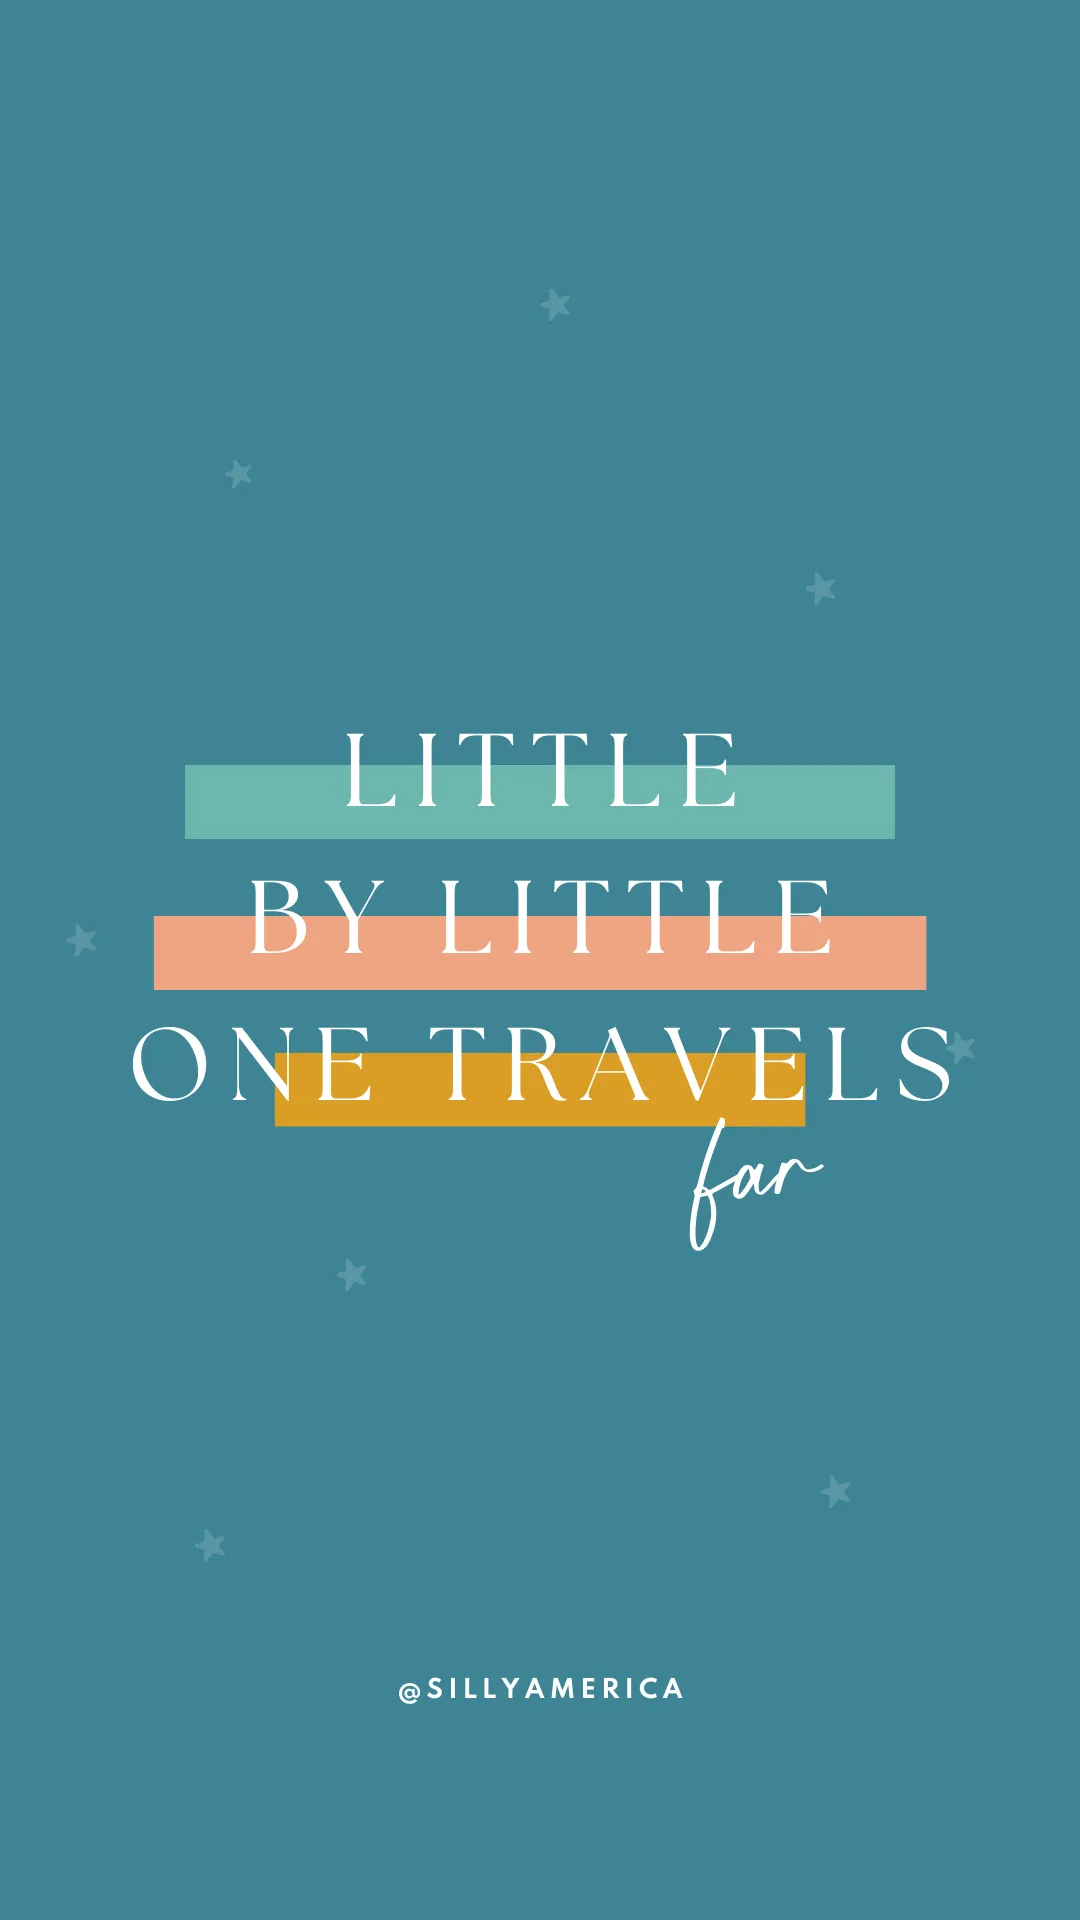 Little by little, one travels far. - Road Trip Captions for Instagram